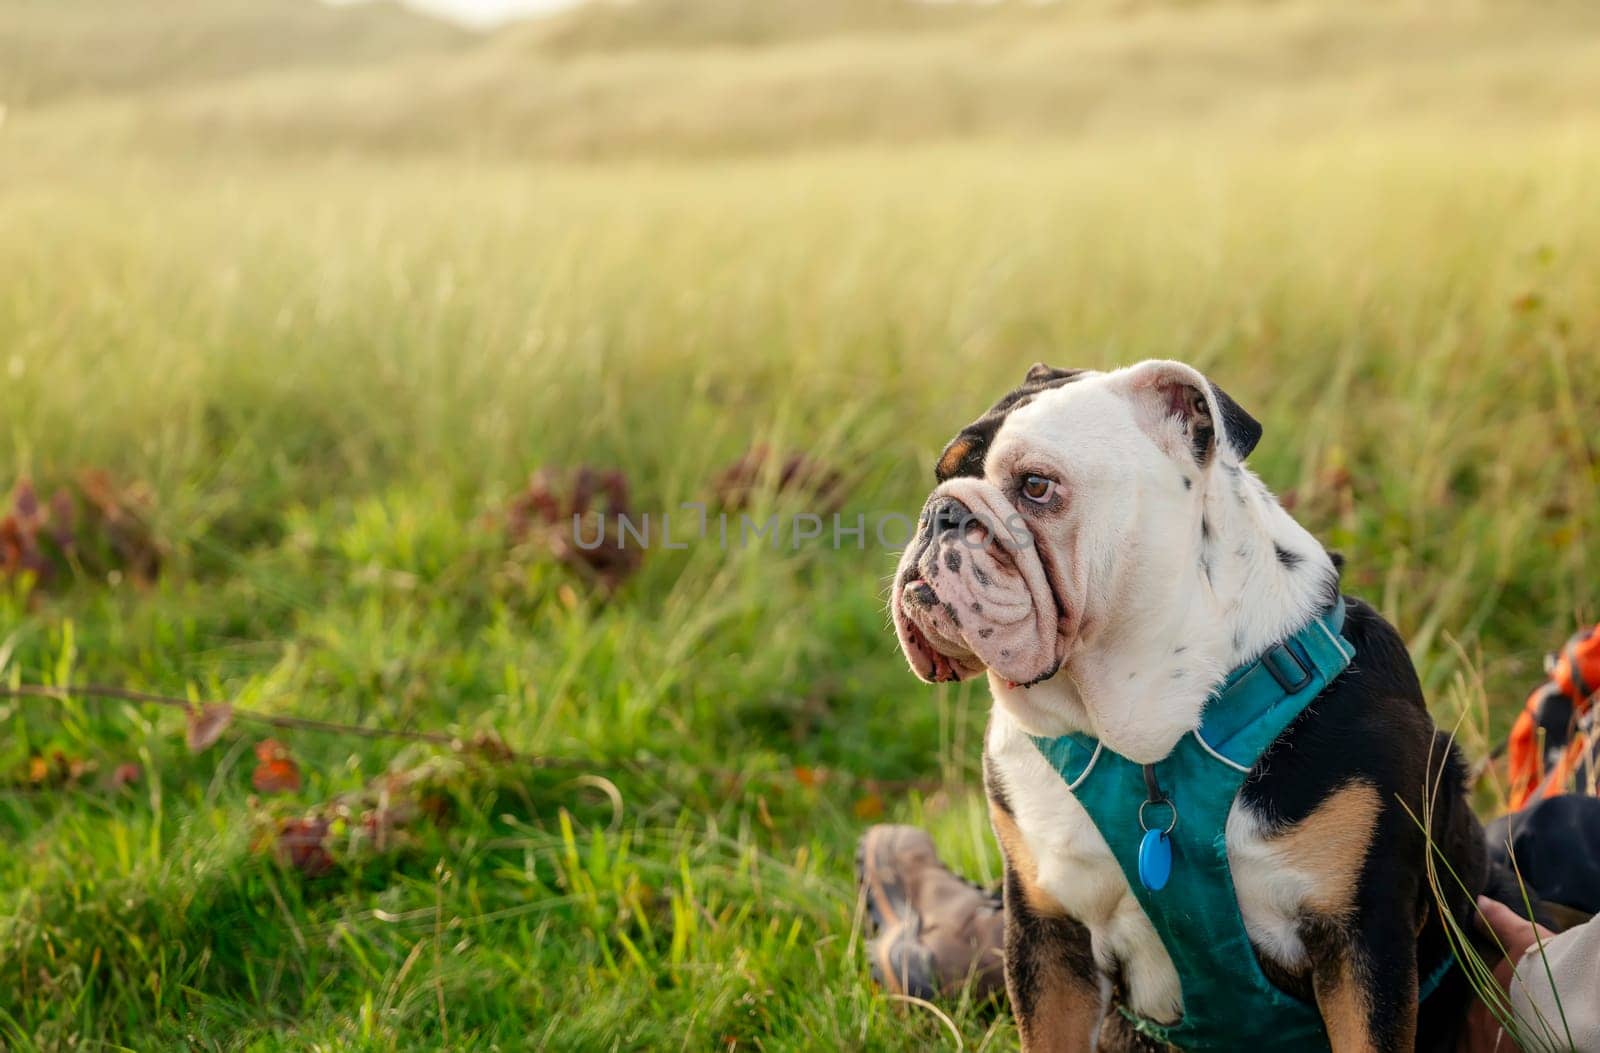 Black tri-color funny sad English British Bulldog Dog out for a walk looking up sitting in the grass in forest on Autumn sunny day at sunset